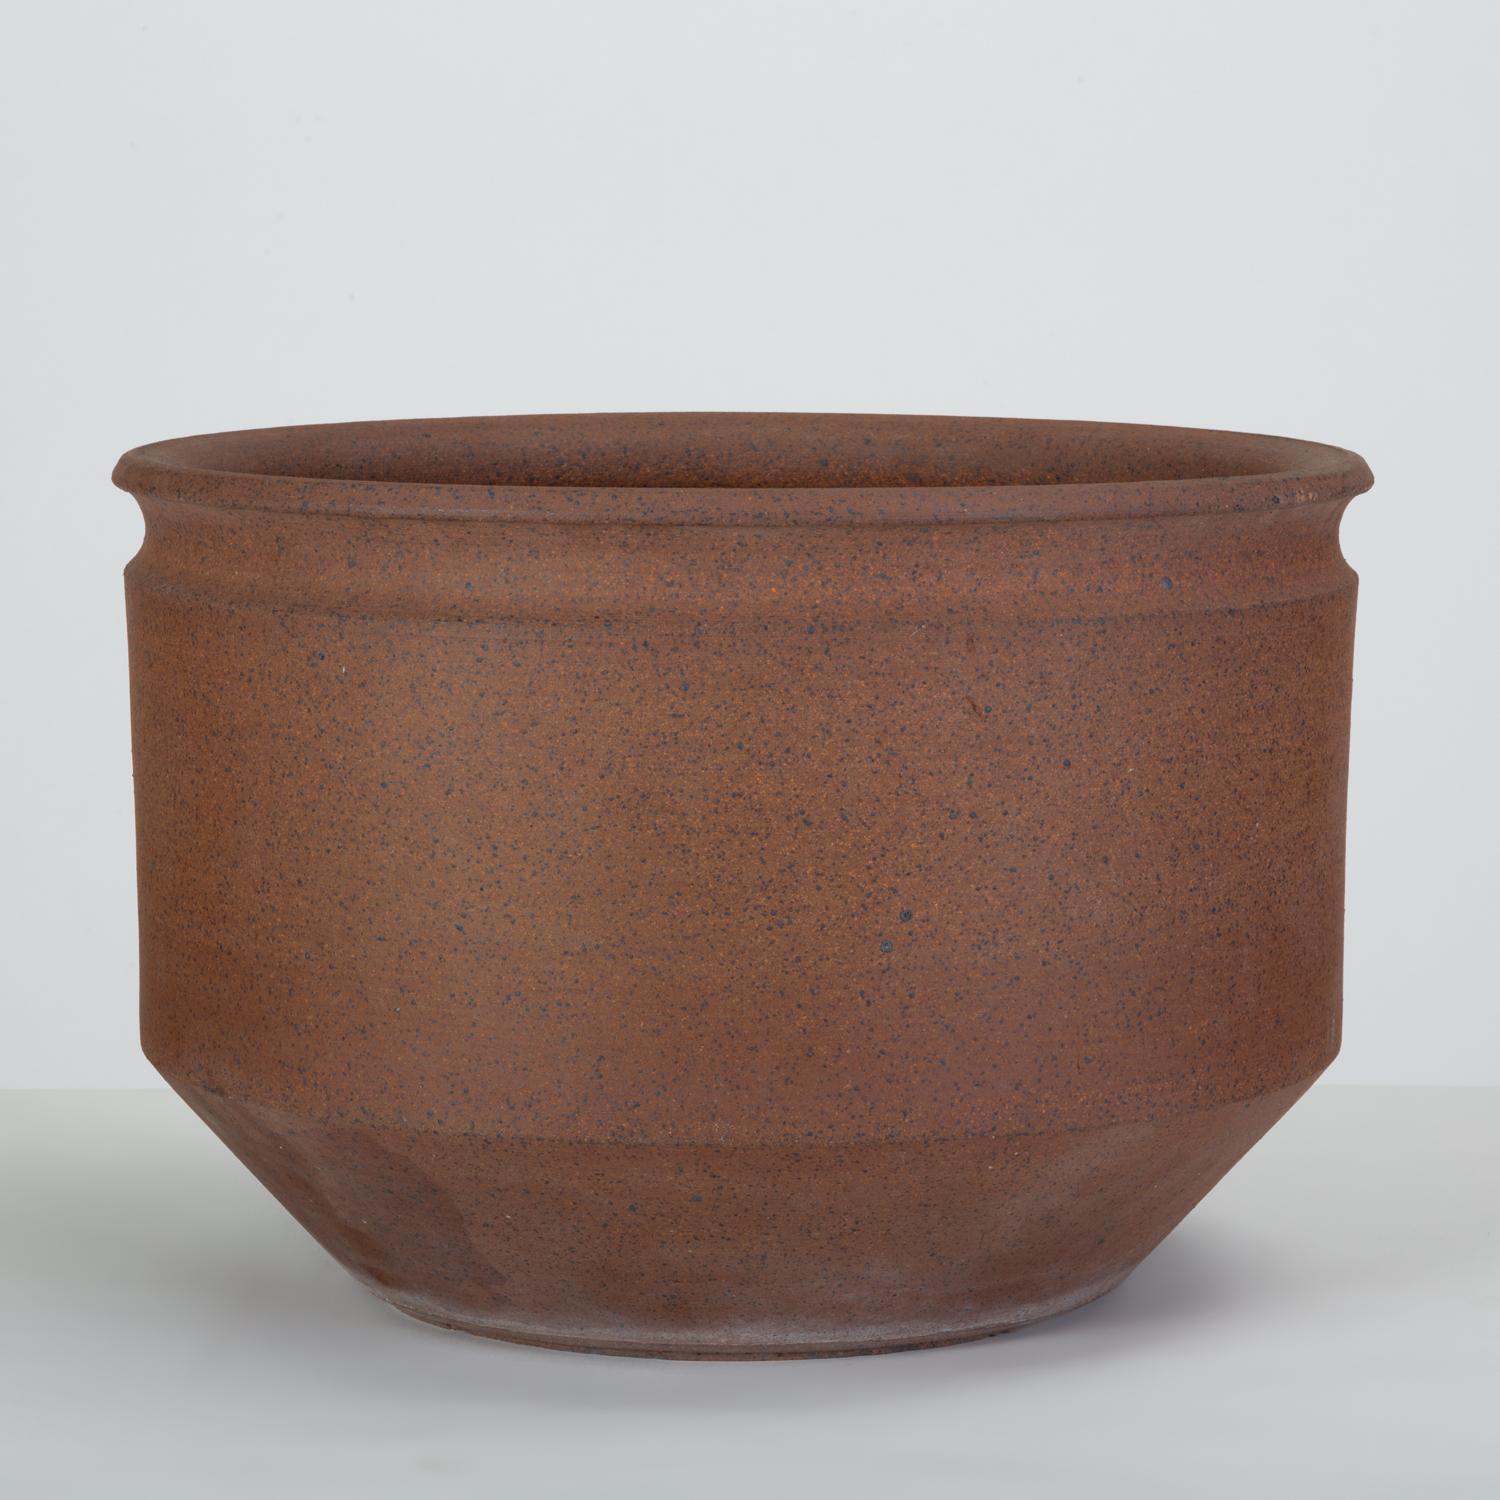 American Pair of Unscored Natural Stoneware Planters by David Cressey & Robert Maxwell